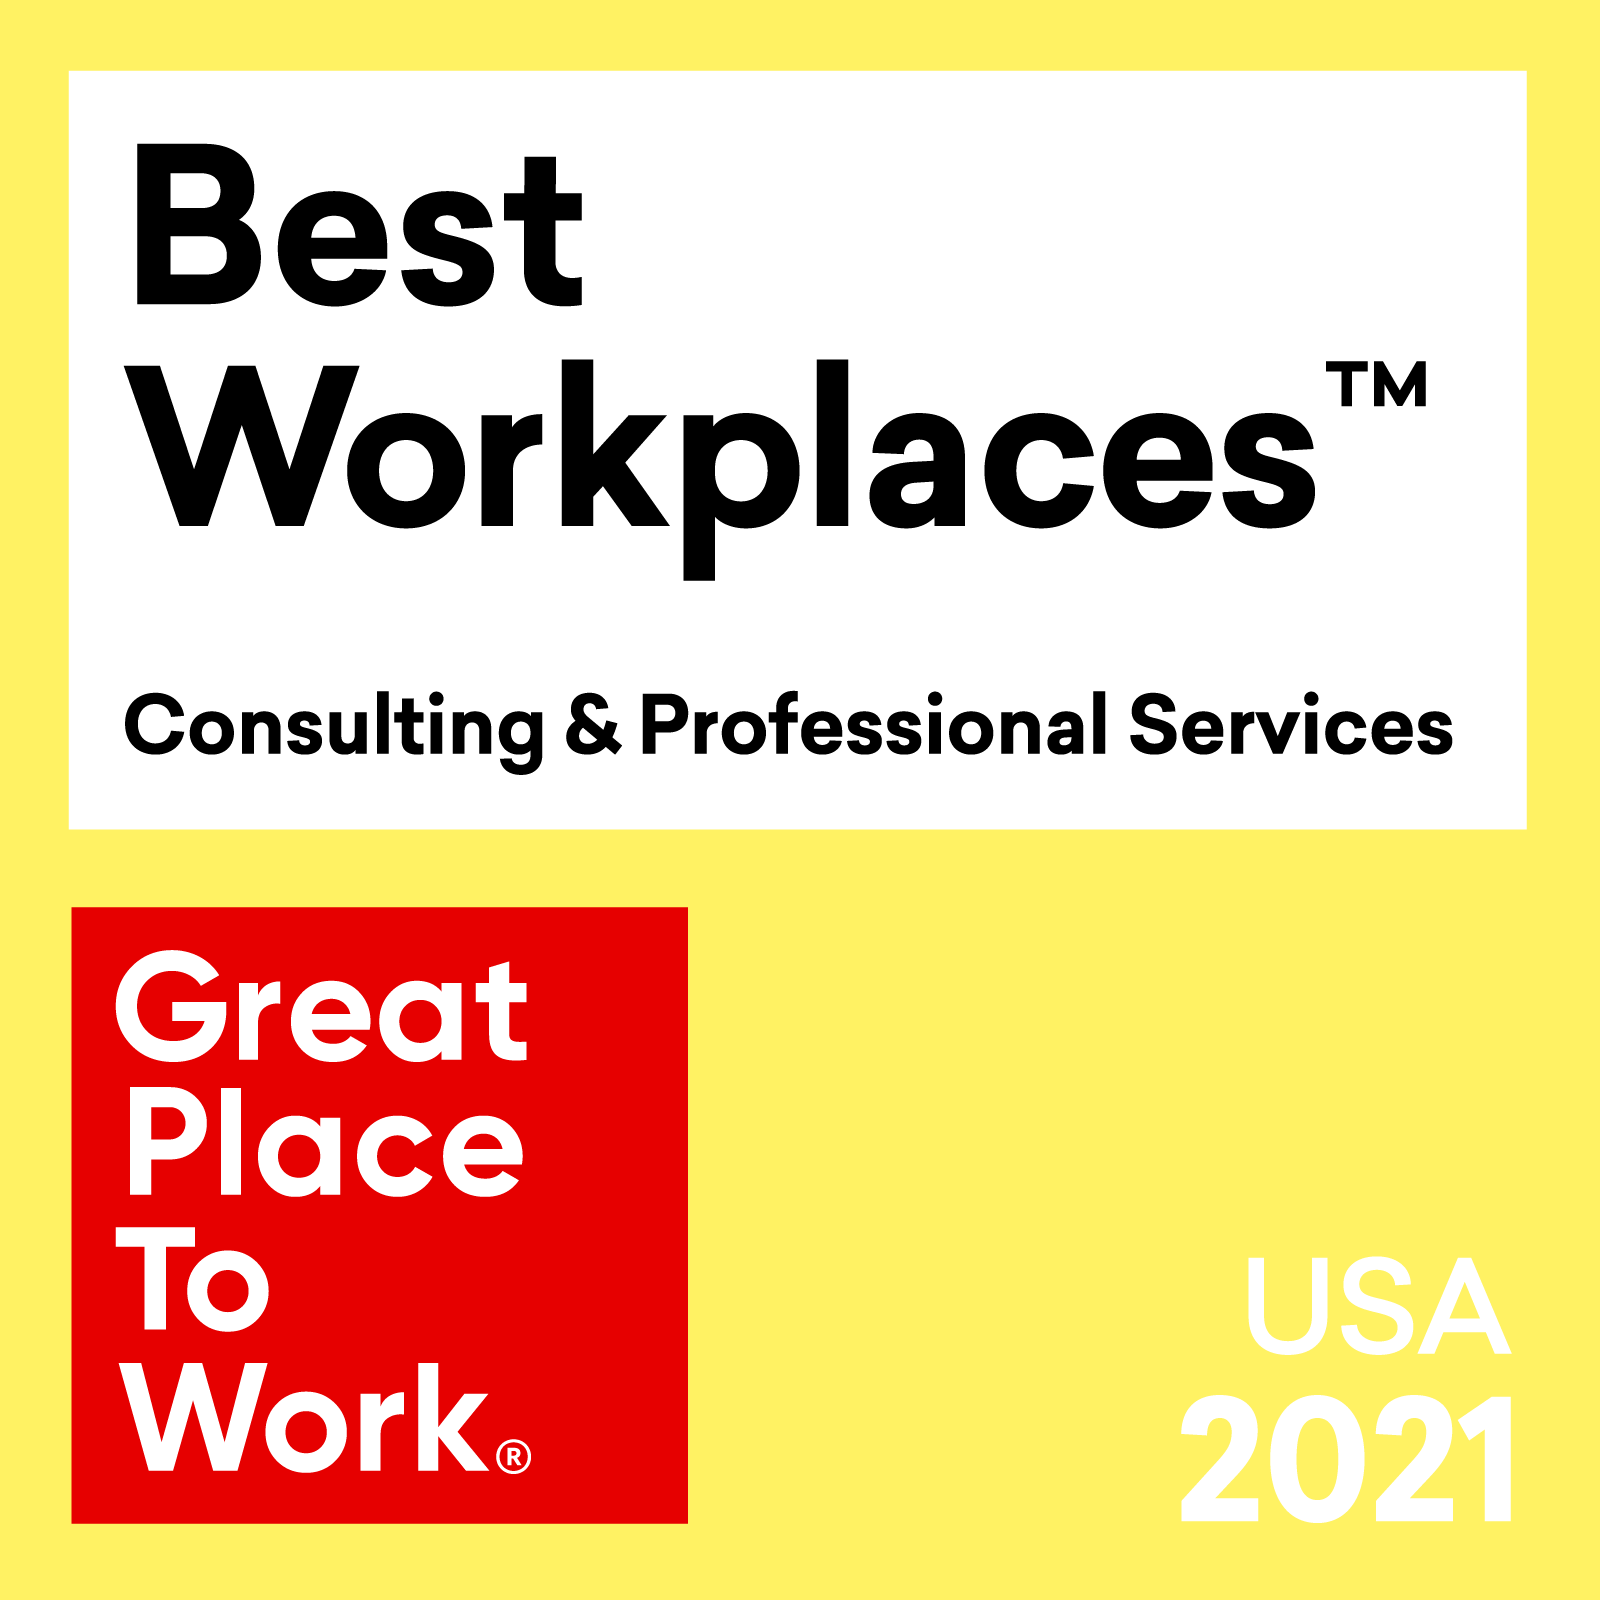 Great Place to Work - Best Workplaces - Consulting & Professional Services Award Winner - Hueman